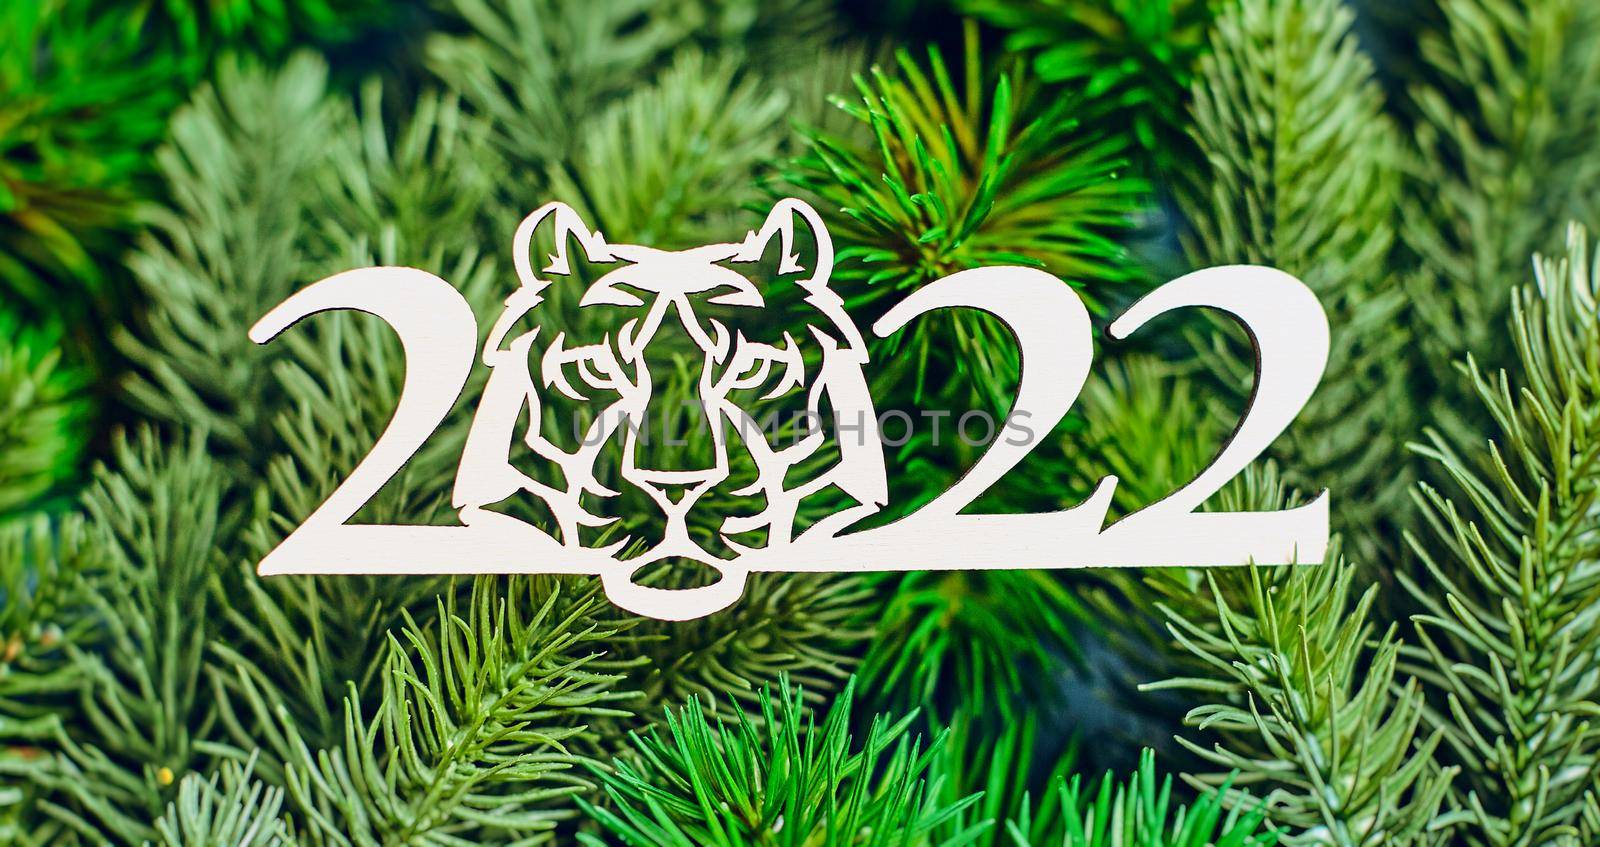 New Year of the Tiger 2022 , Merry Christmas and Happy New Year.